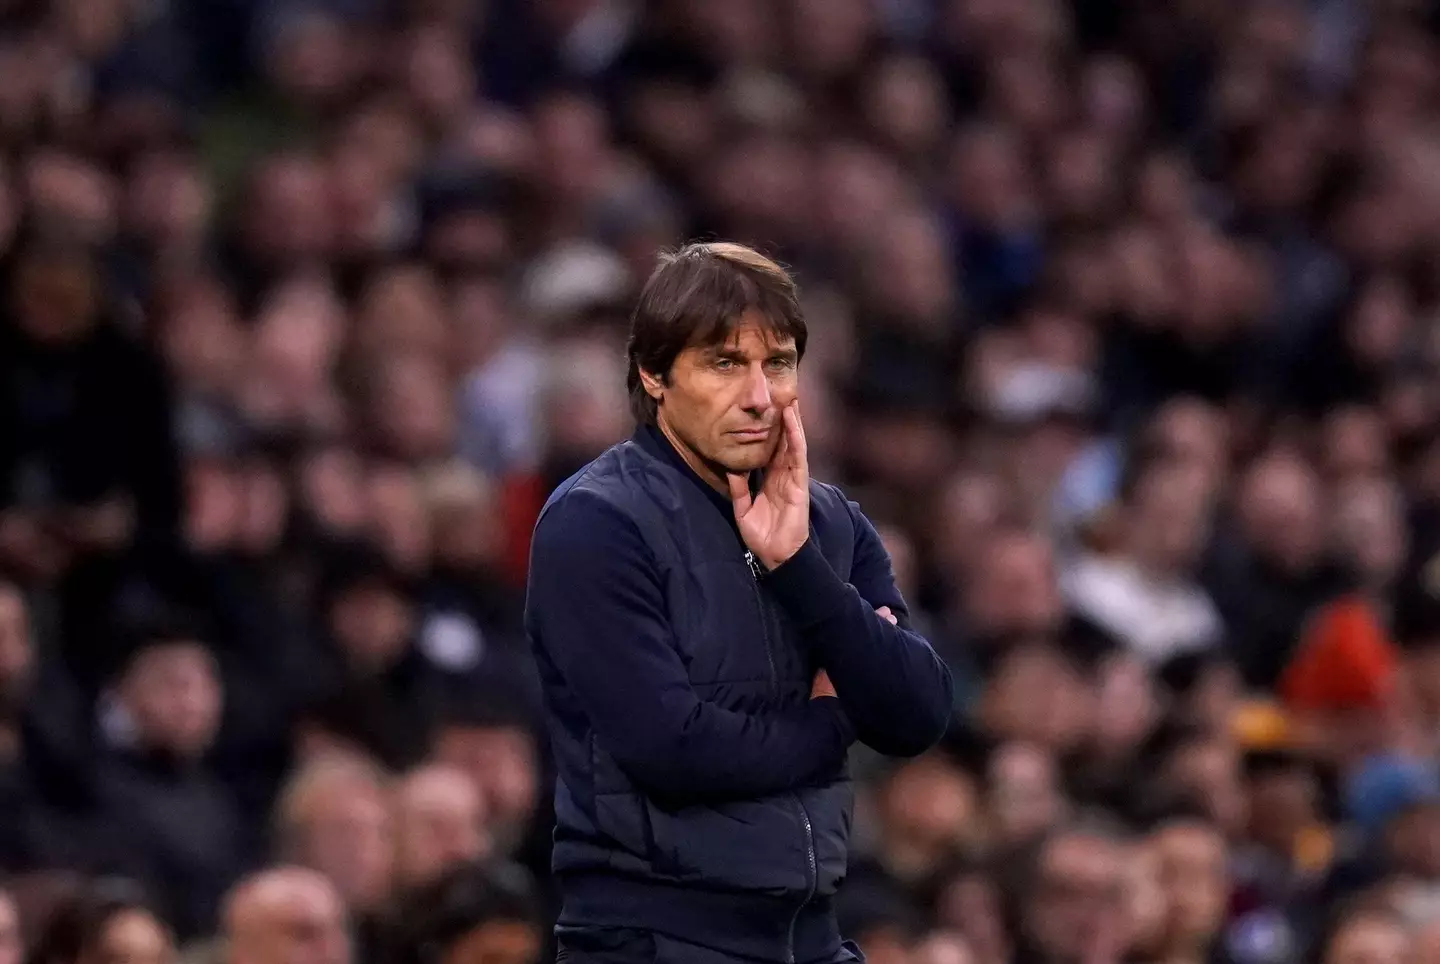 Conte during the Villa game. (Image